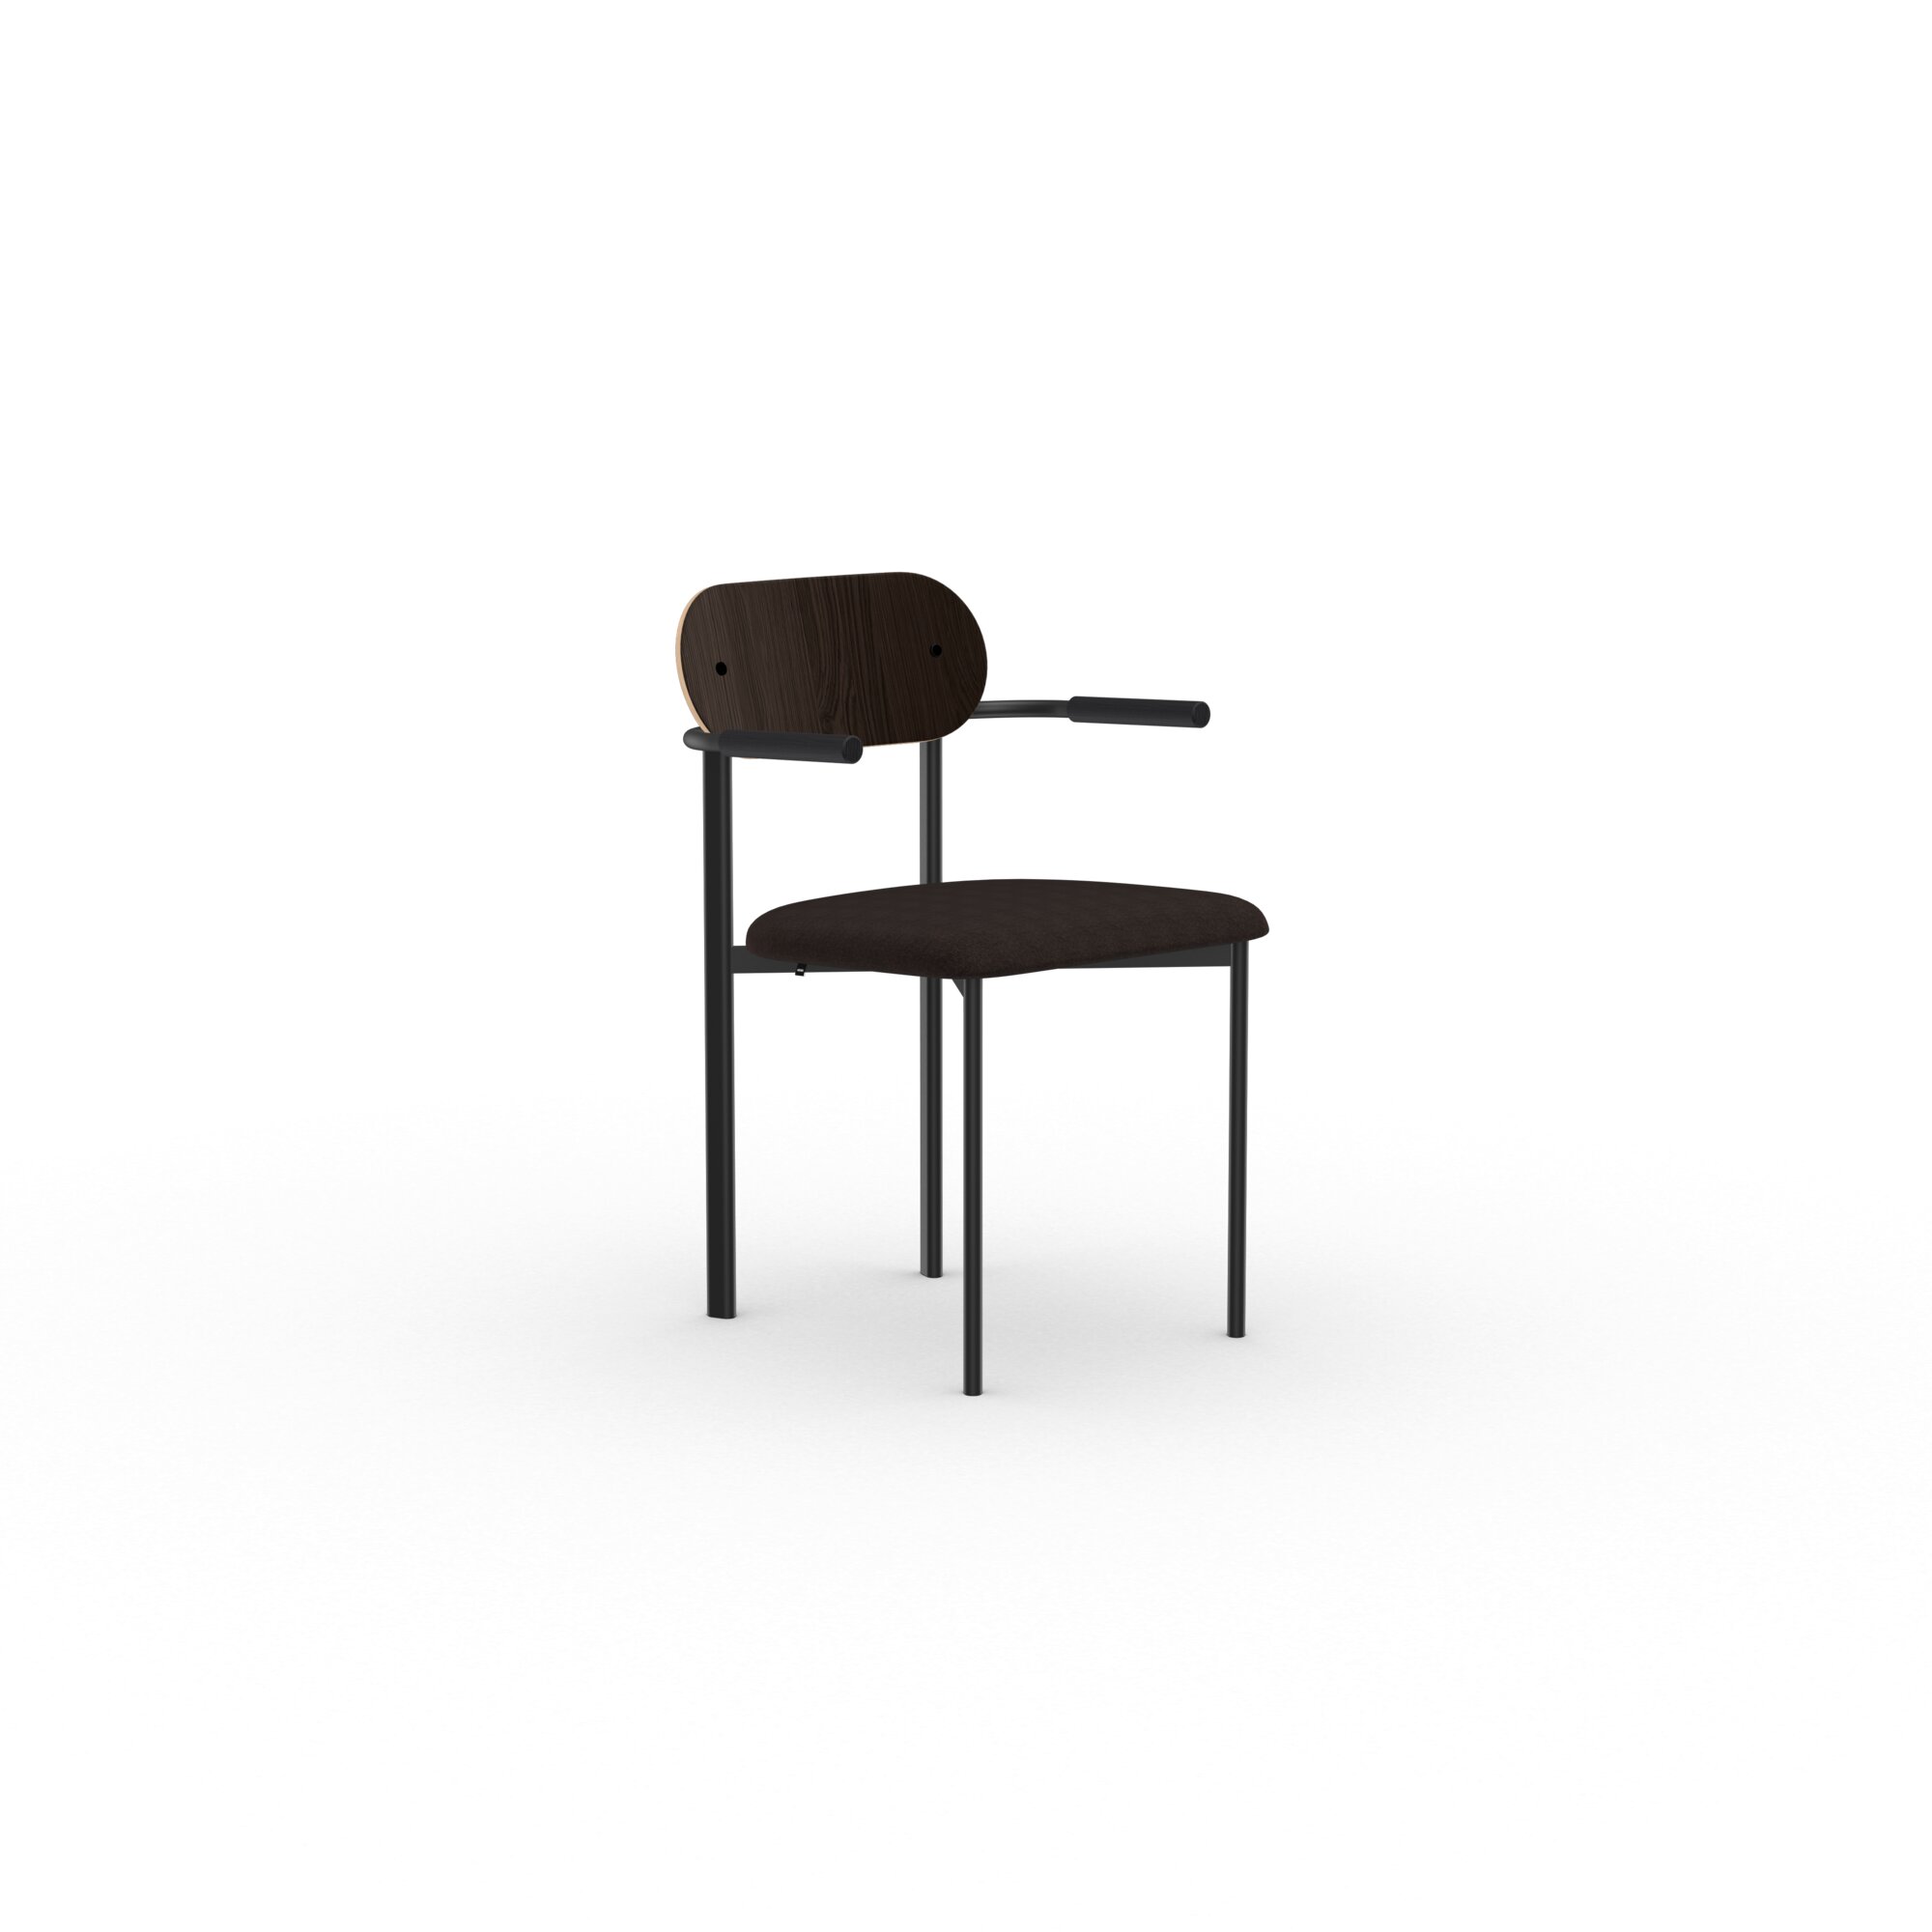 Design modern dining chair | Oblique Dining Chair with Armrest  soil coffee81 | Studio HENK| 